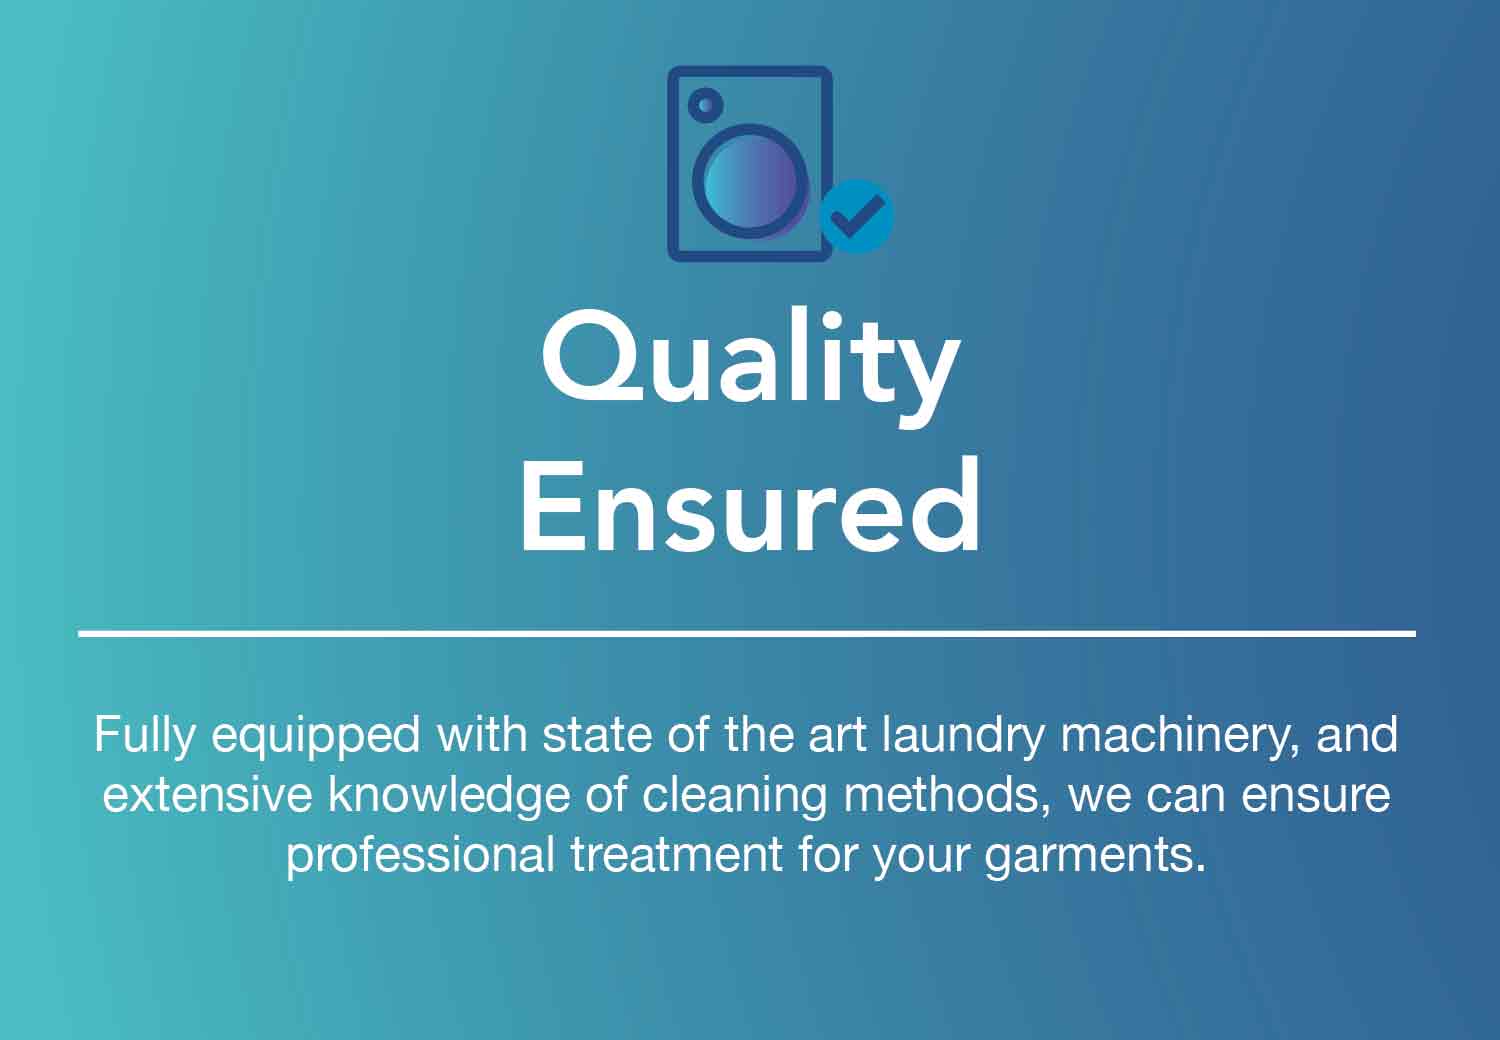 Quality Ensured. Quality is the most fundamental part that defines the outcome of a laundry process. We can ensure you that our water is purified and profen safe for health and the environment.